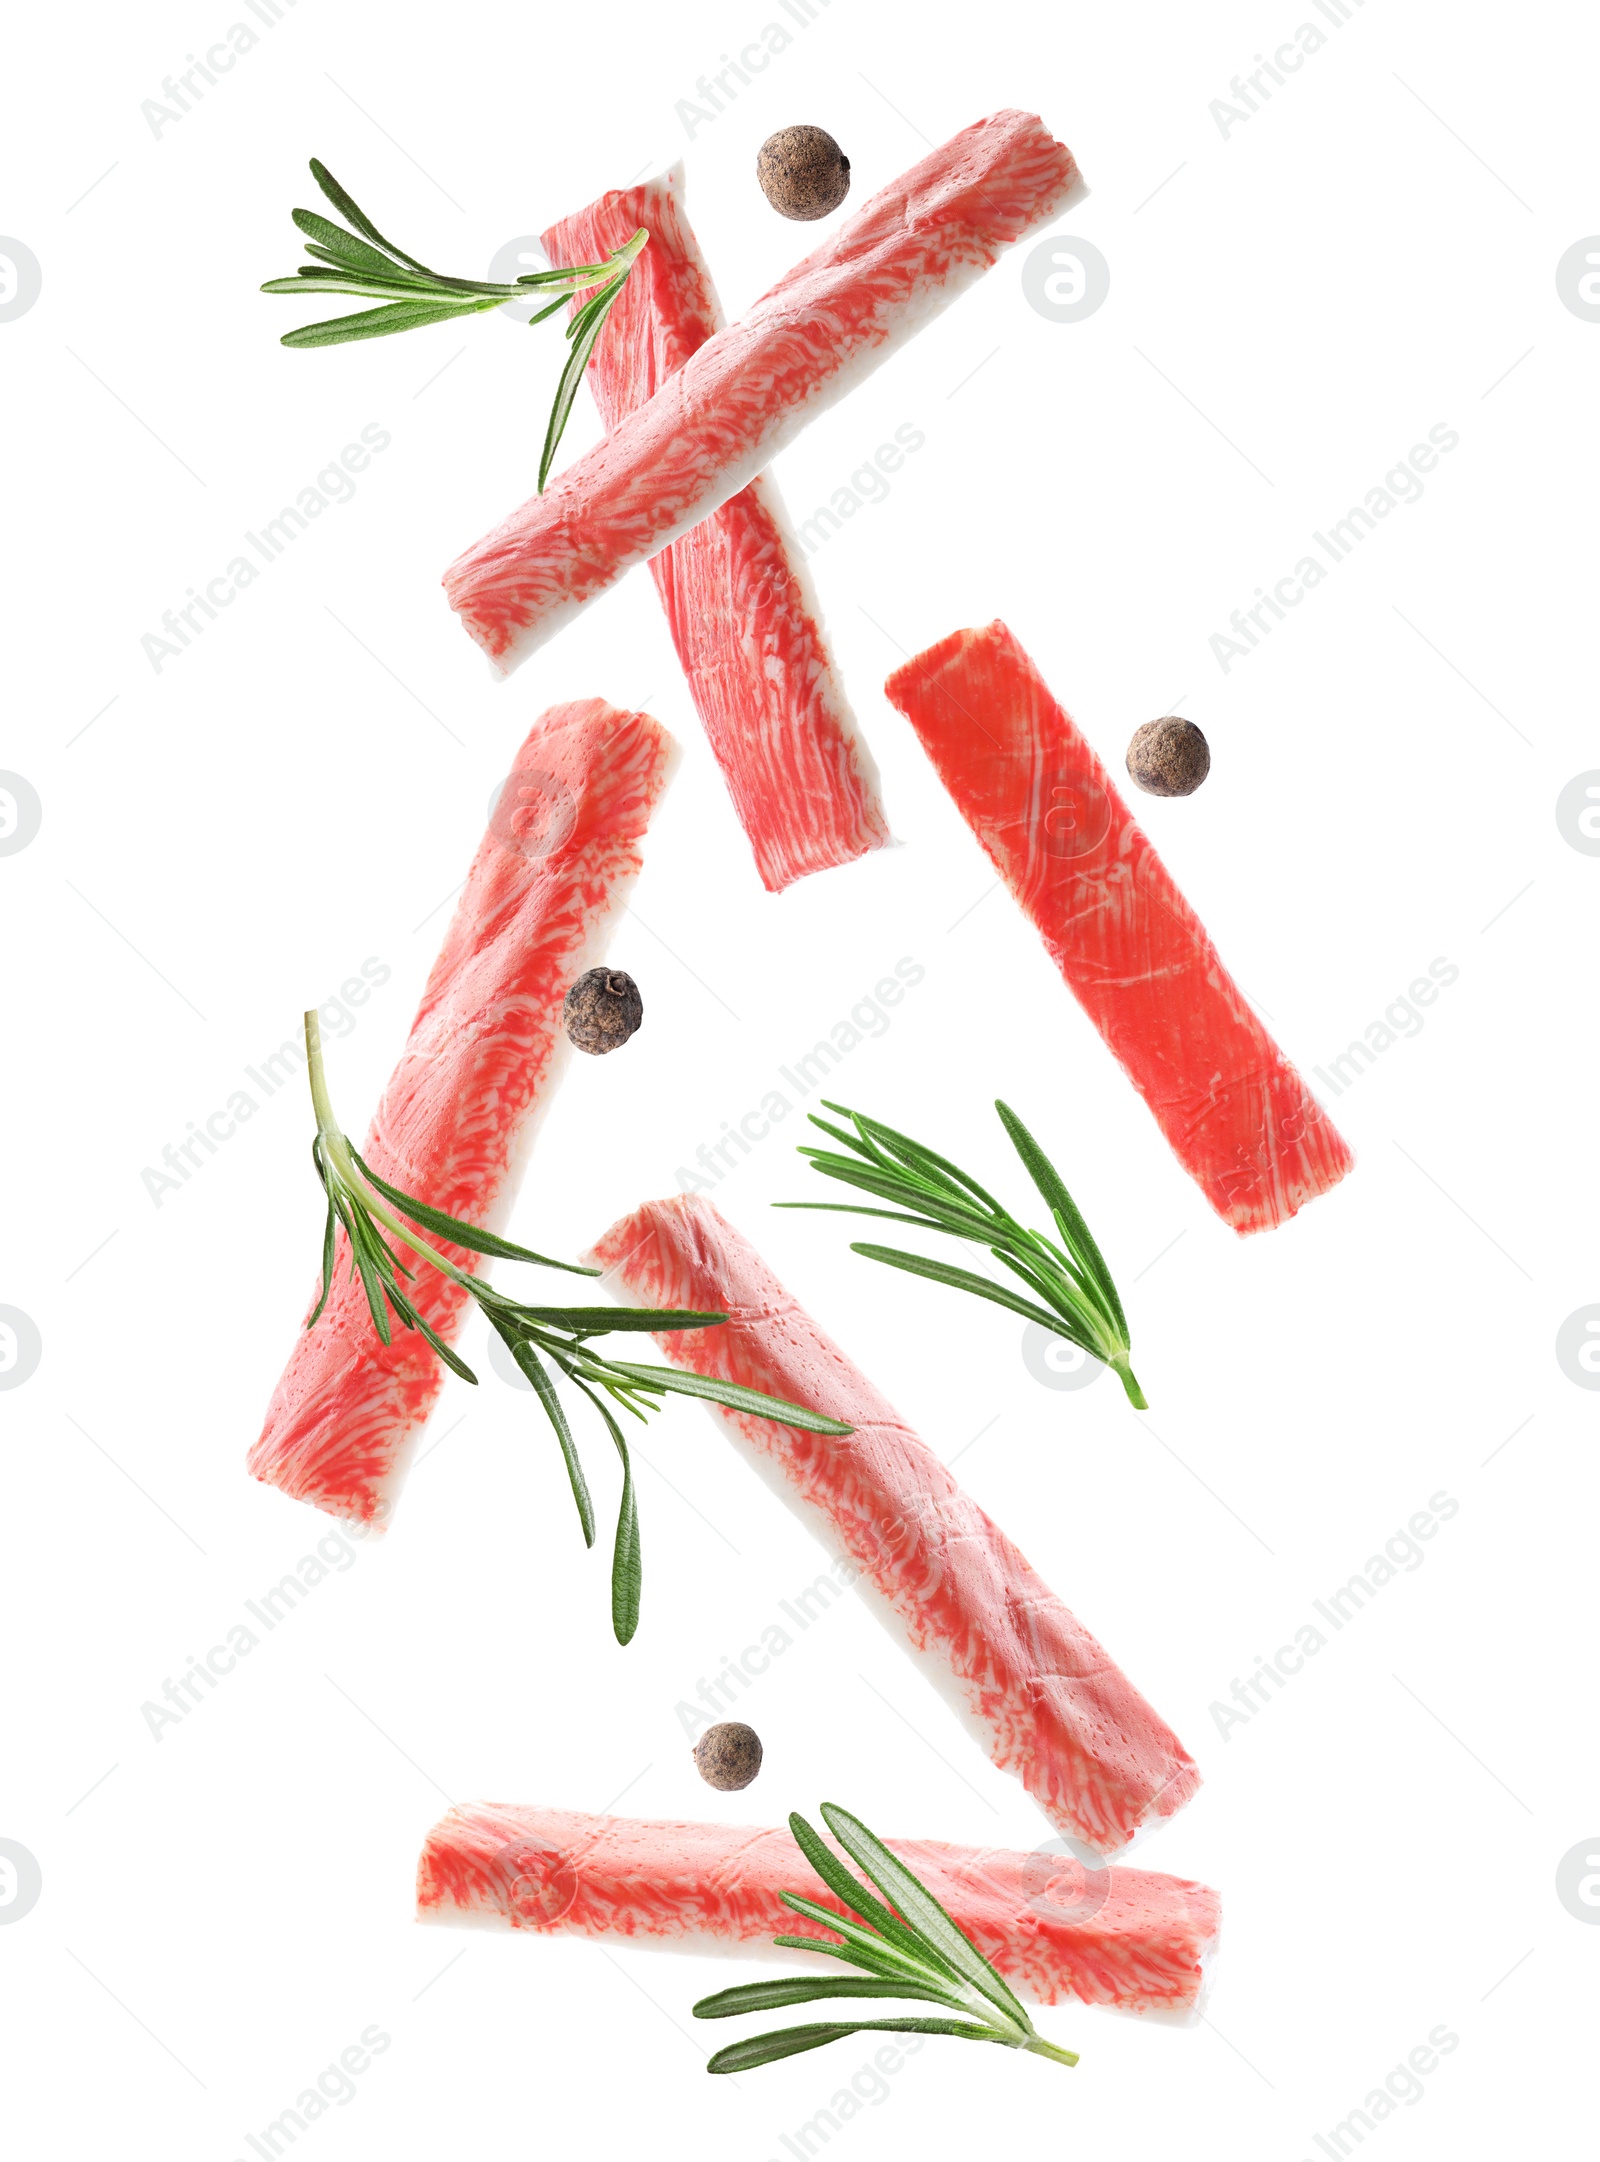 Image of Cut fresh crab sticks, rosemary and allspice falling on white background